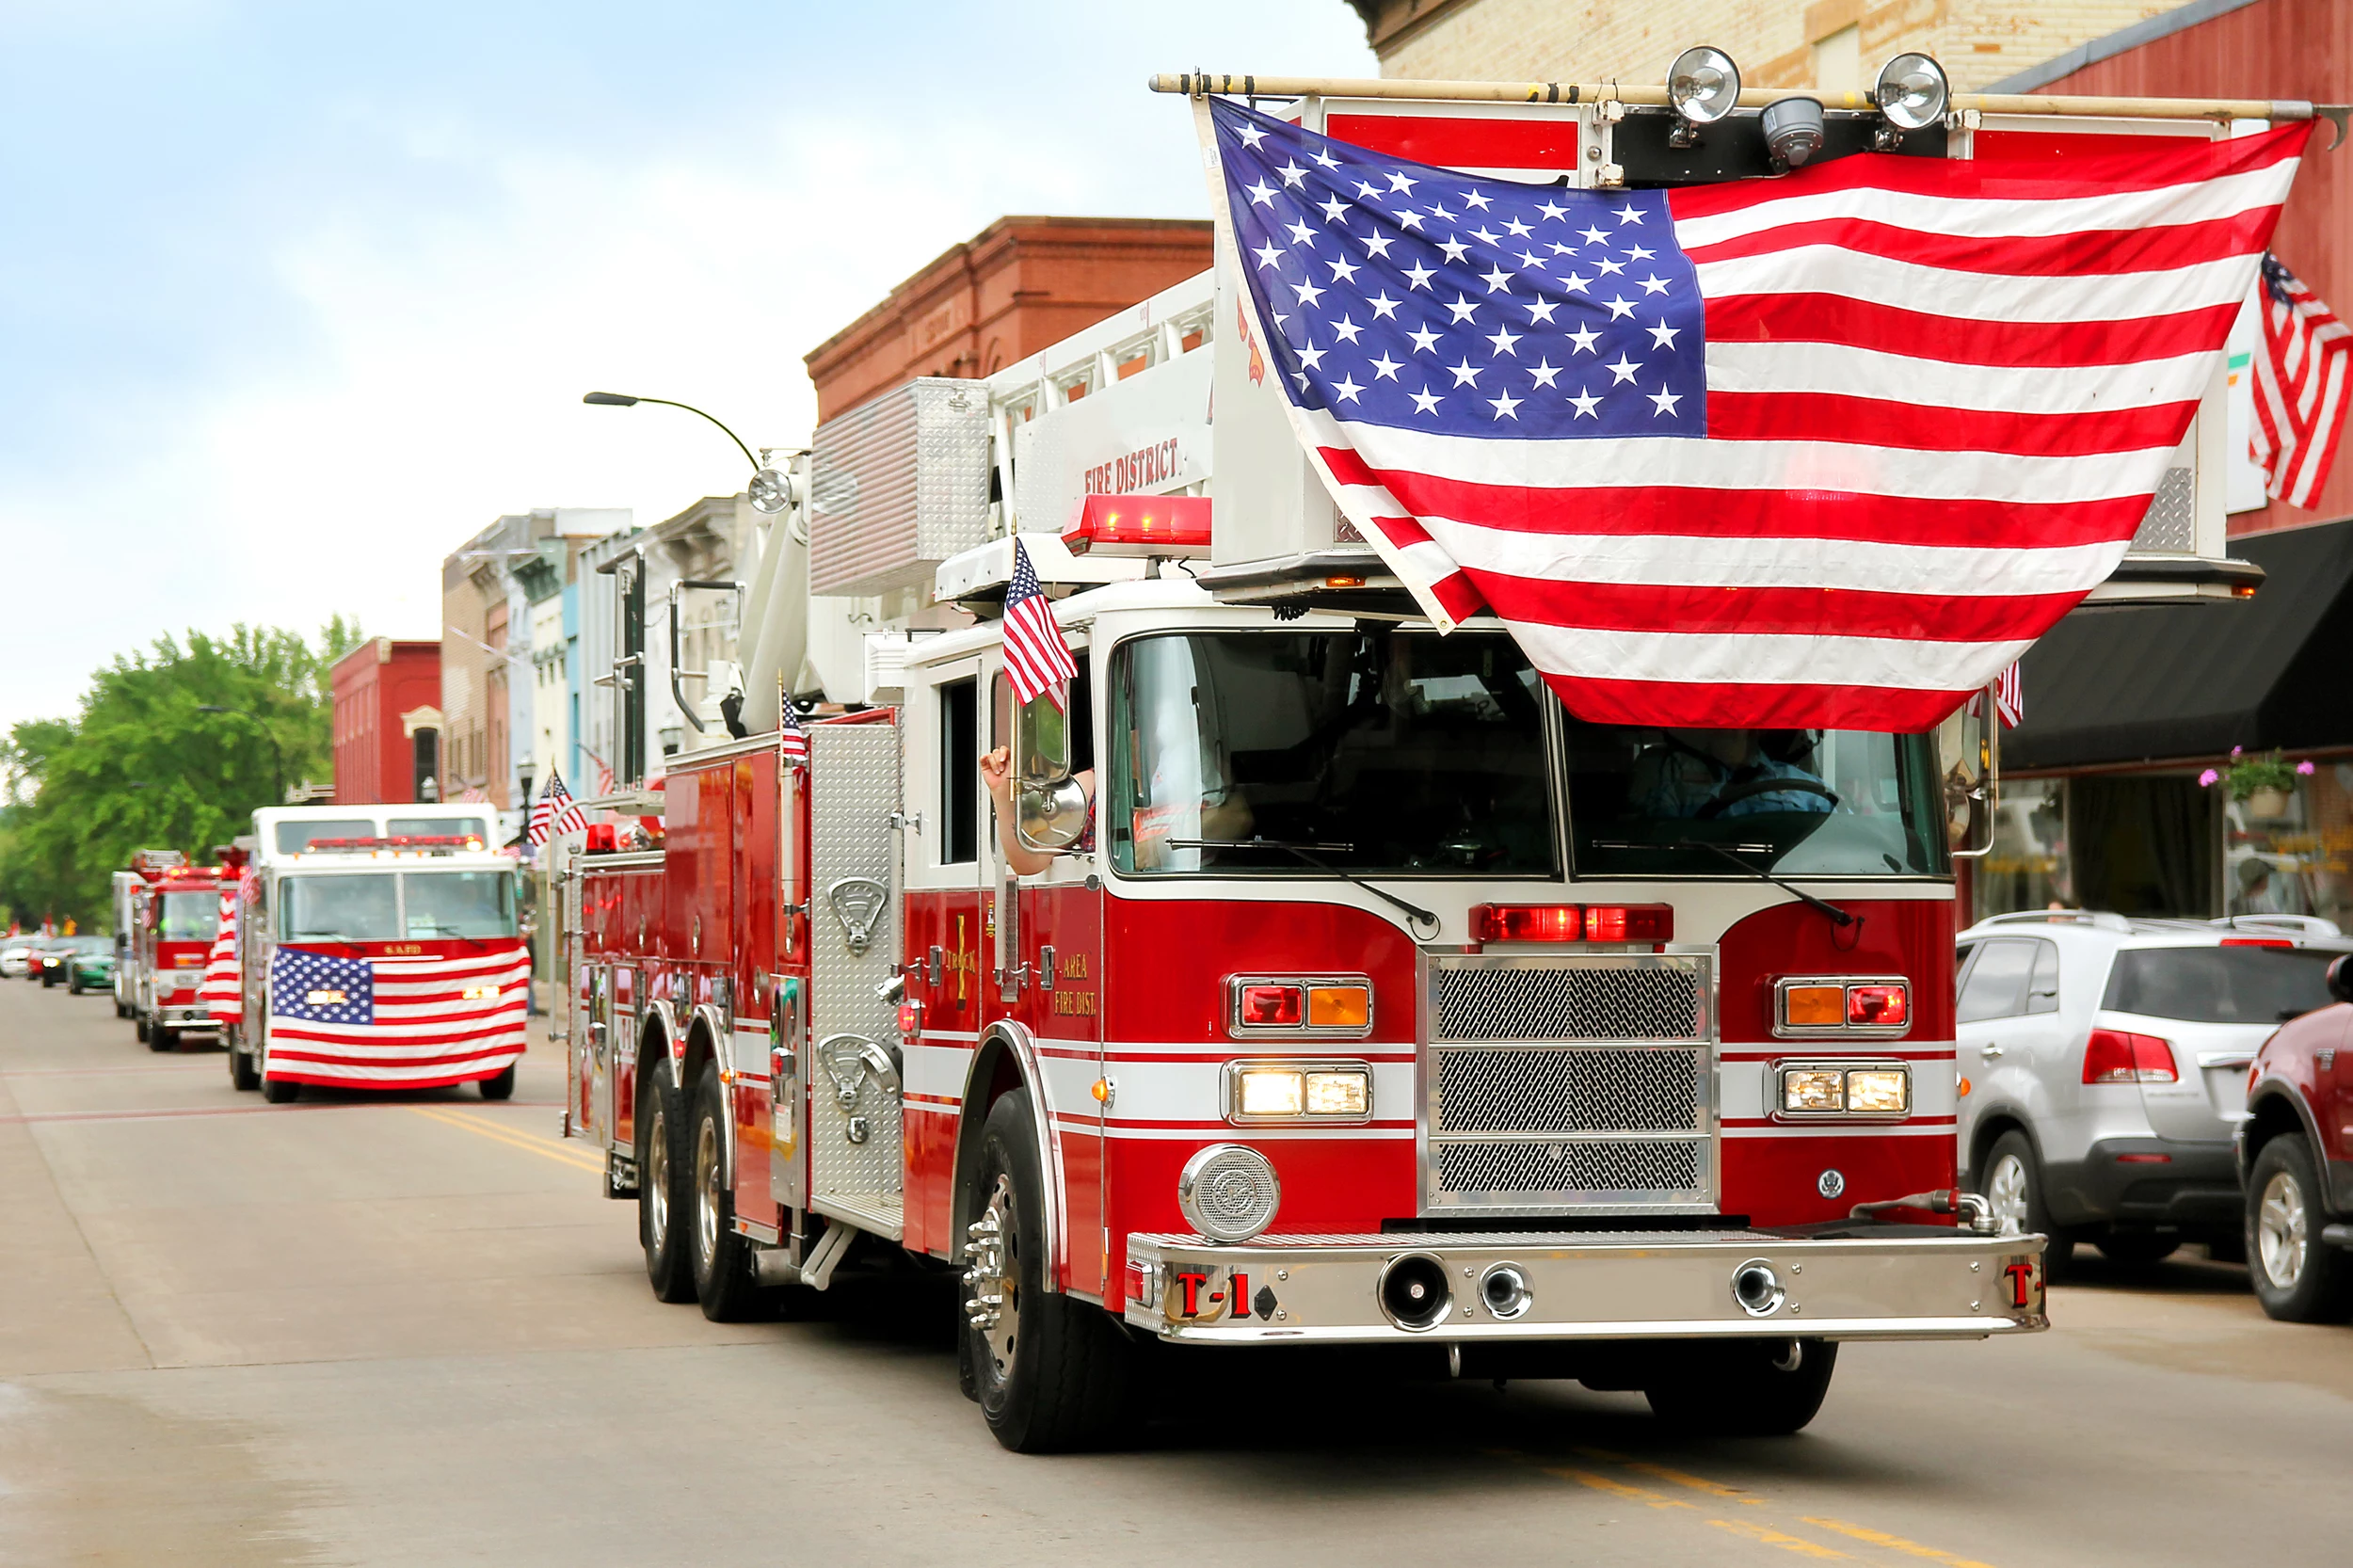 2019 Memorial Day parades and events in New Jersey